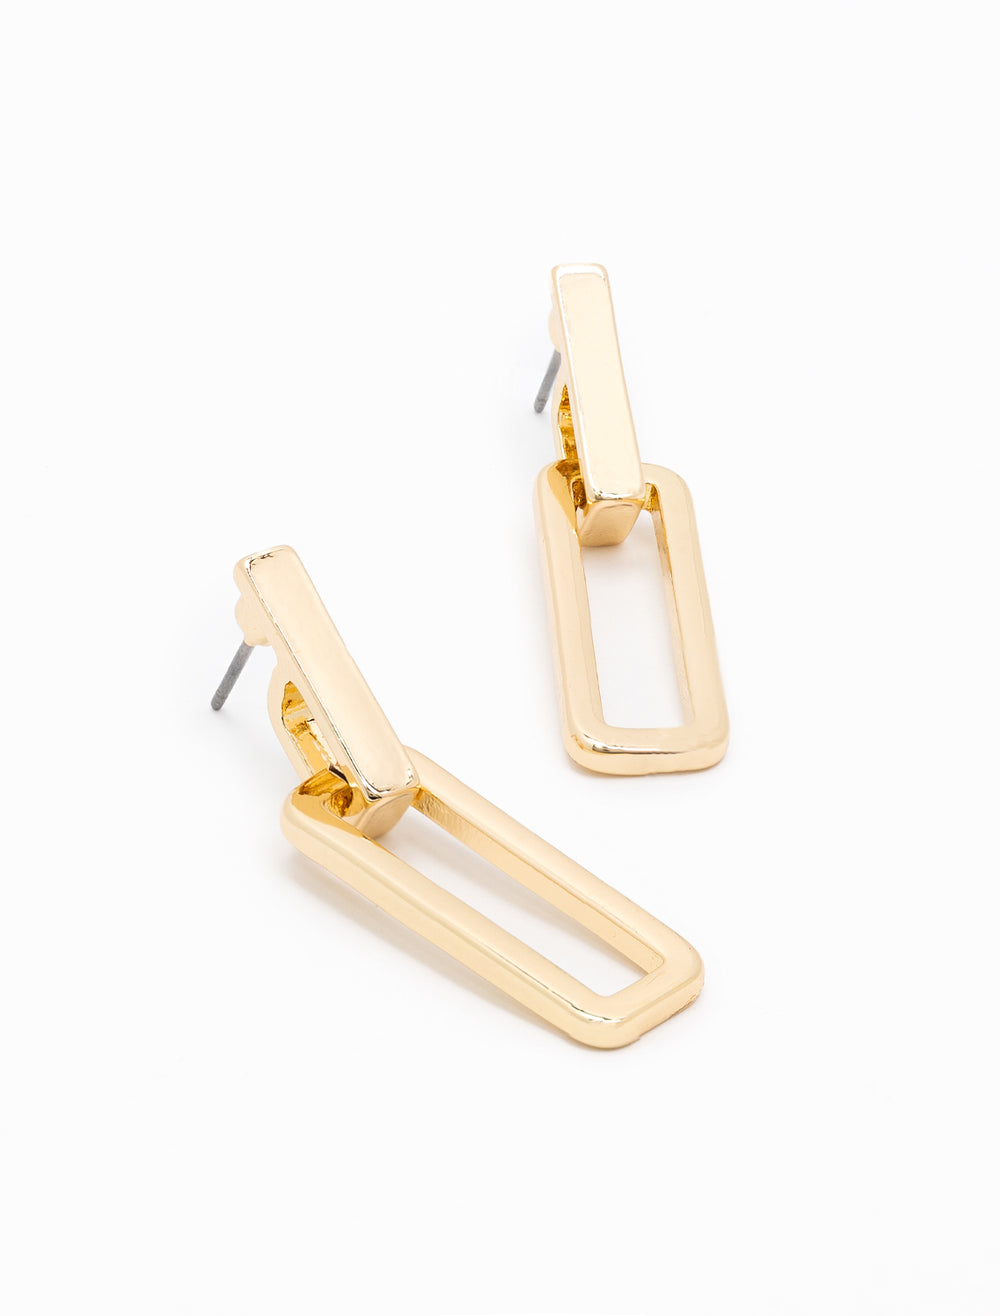 Close-up view of AV Max's Paperclip Chain Post Earrings in Gold.